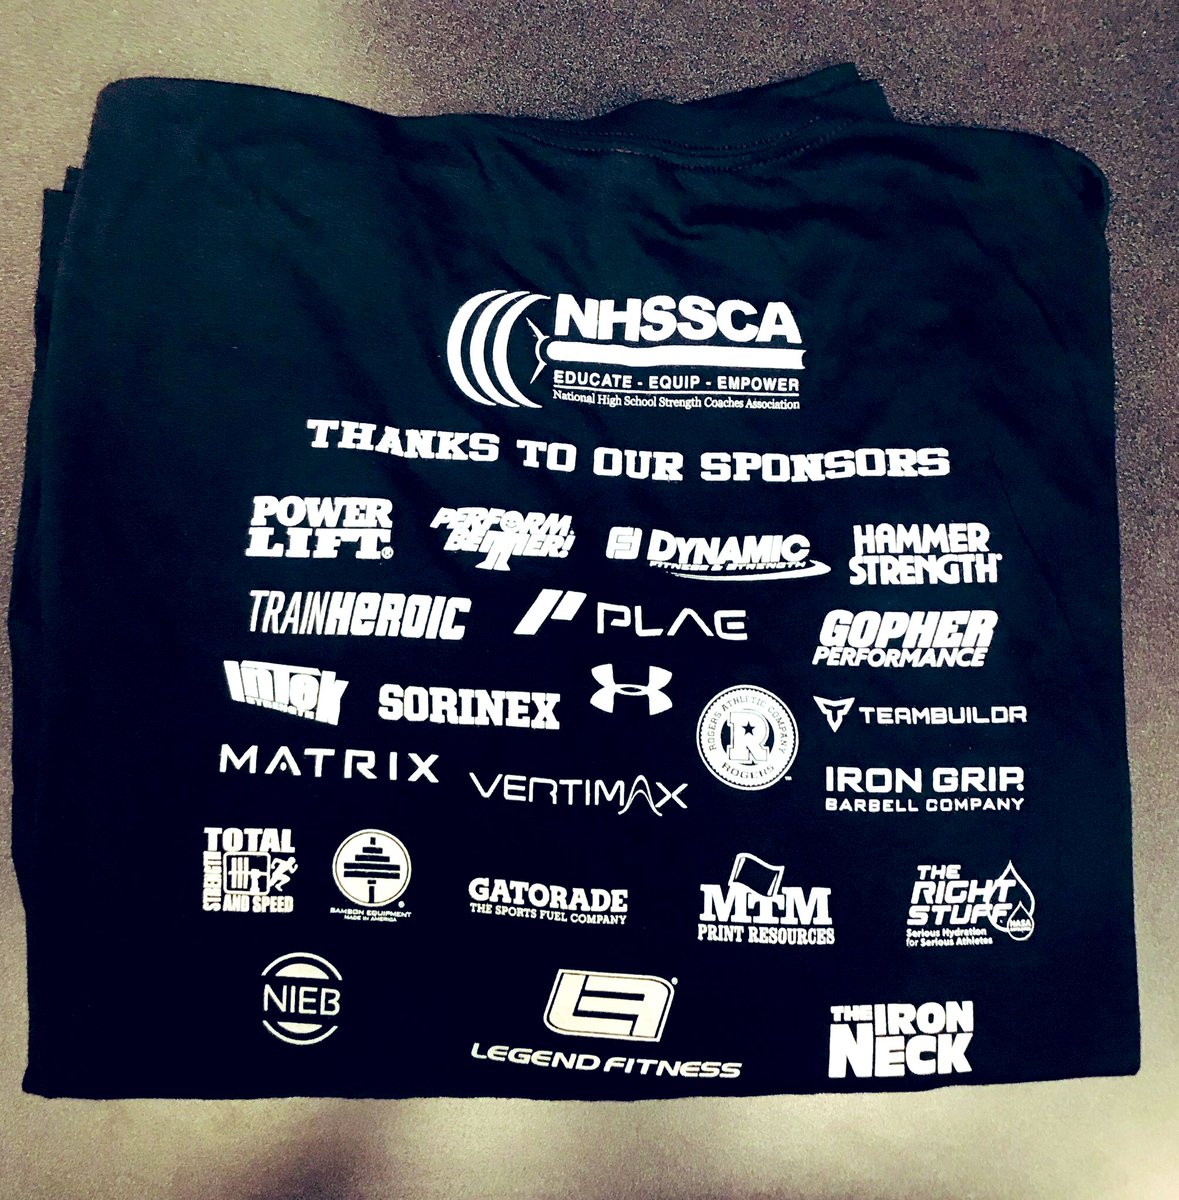 HUGE THANK YOU to our sponsors! This event would not have been possible without you.

The future is bright! @NHSSCA #PacificRegional #2019